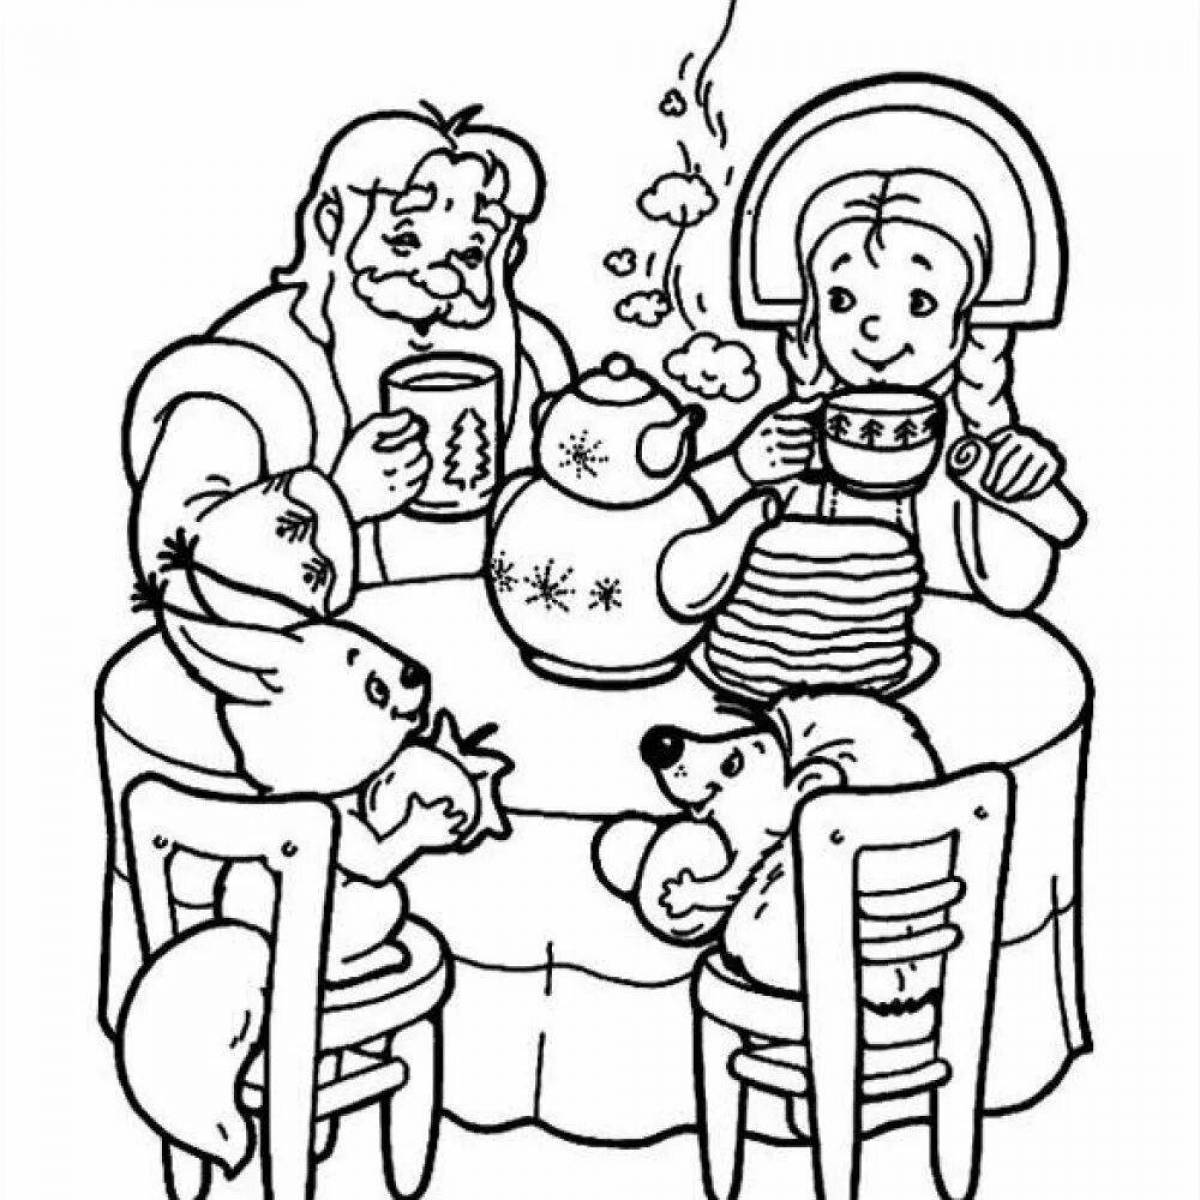 Shrovetide holiday themed coloring page